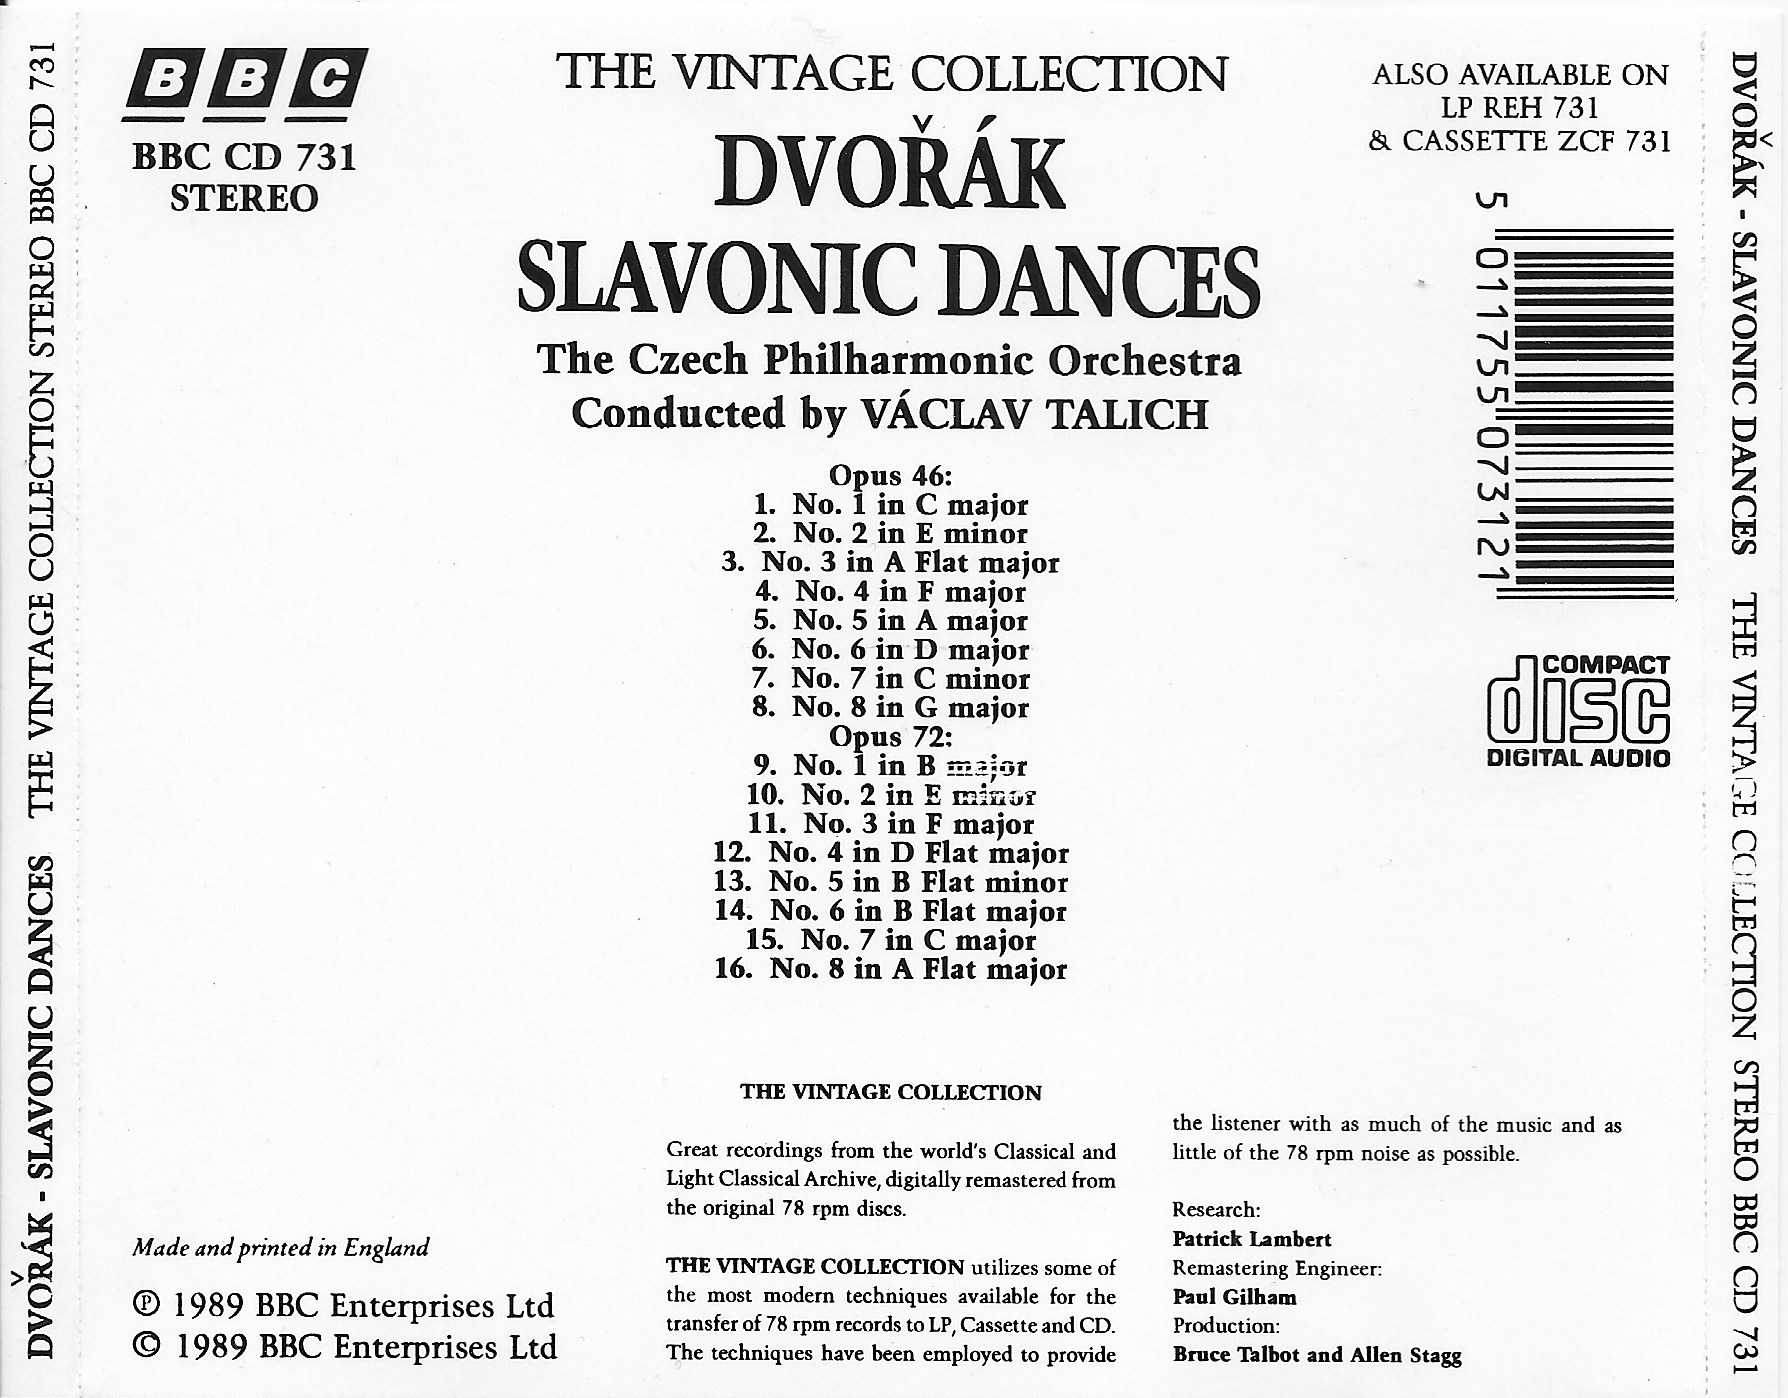 Picture of BBCCD731 The vintage collection - Dvorak Slavonic dances by artist Dvorak from the BBC records and Tapes library